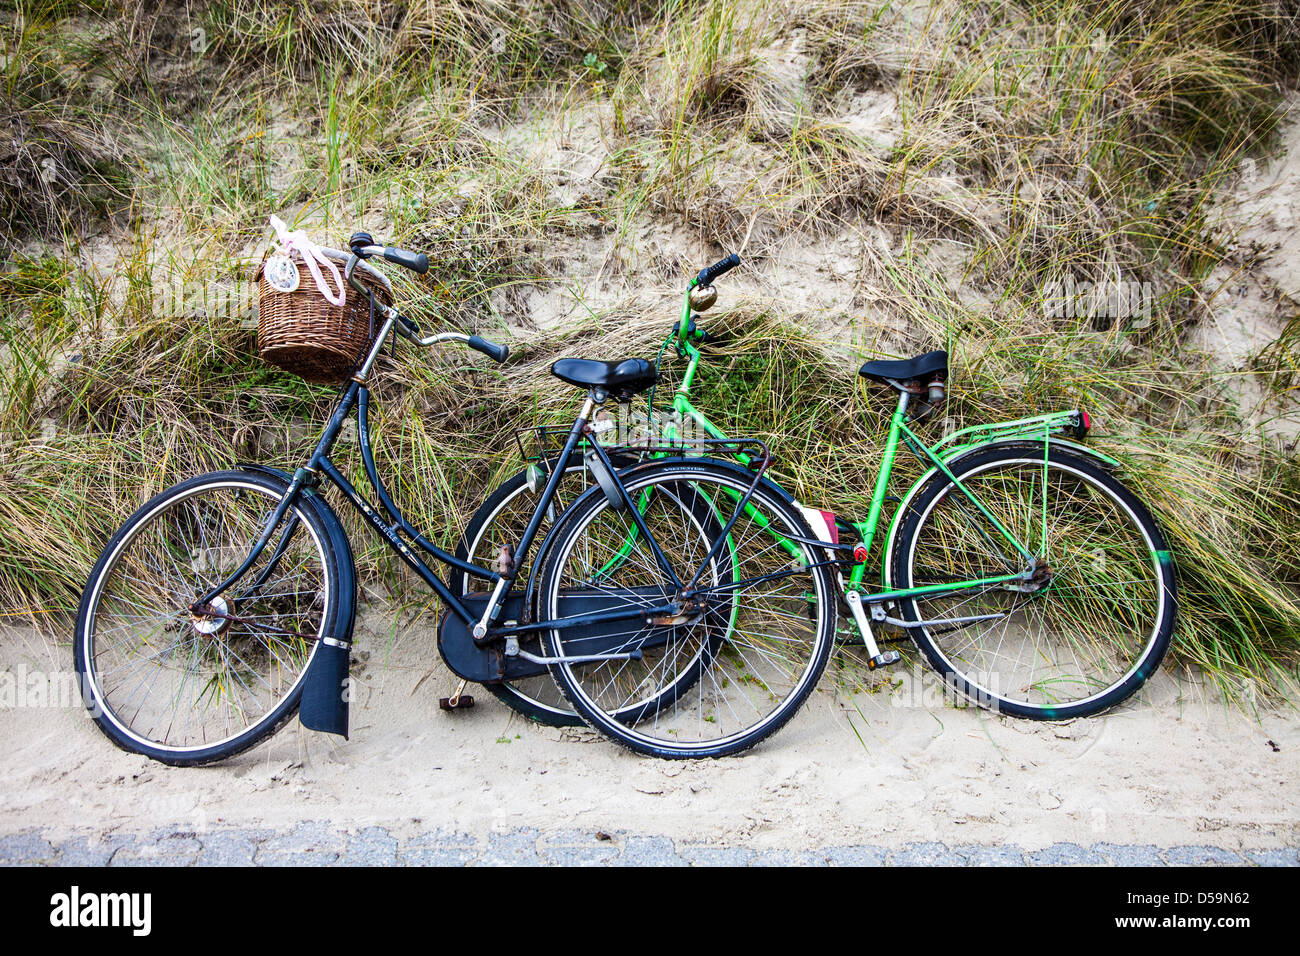 Bicycles leaning at a dune of a beach, North Sea Island, East Frisian, Spiekeroog, Germany Stock Photo